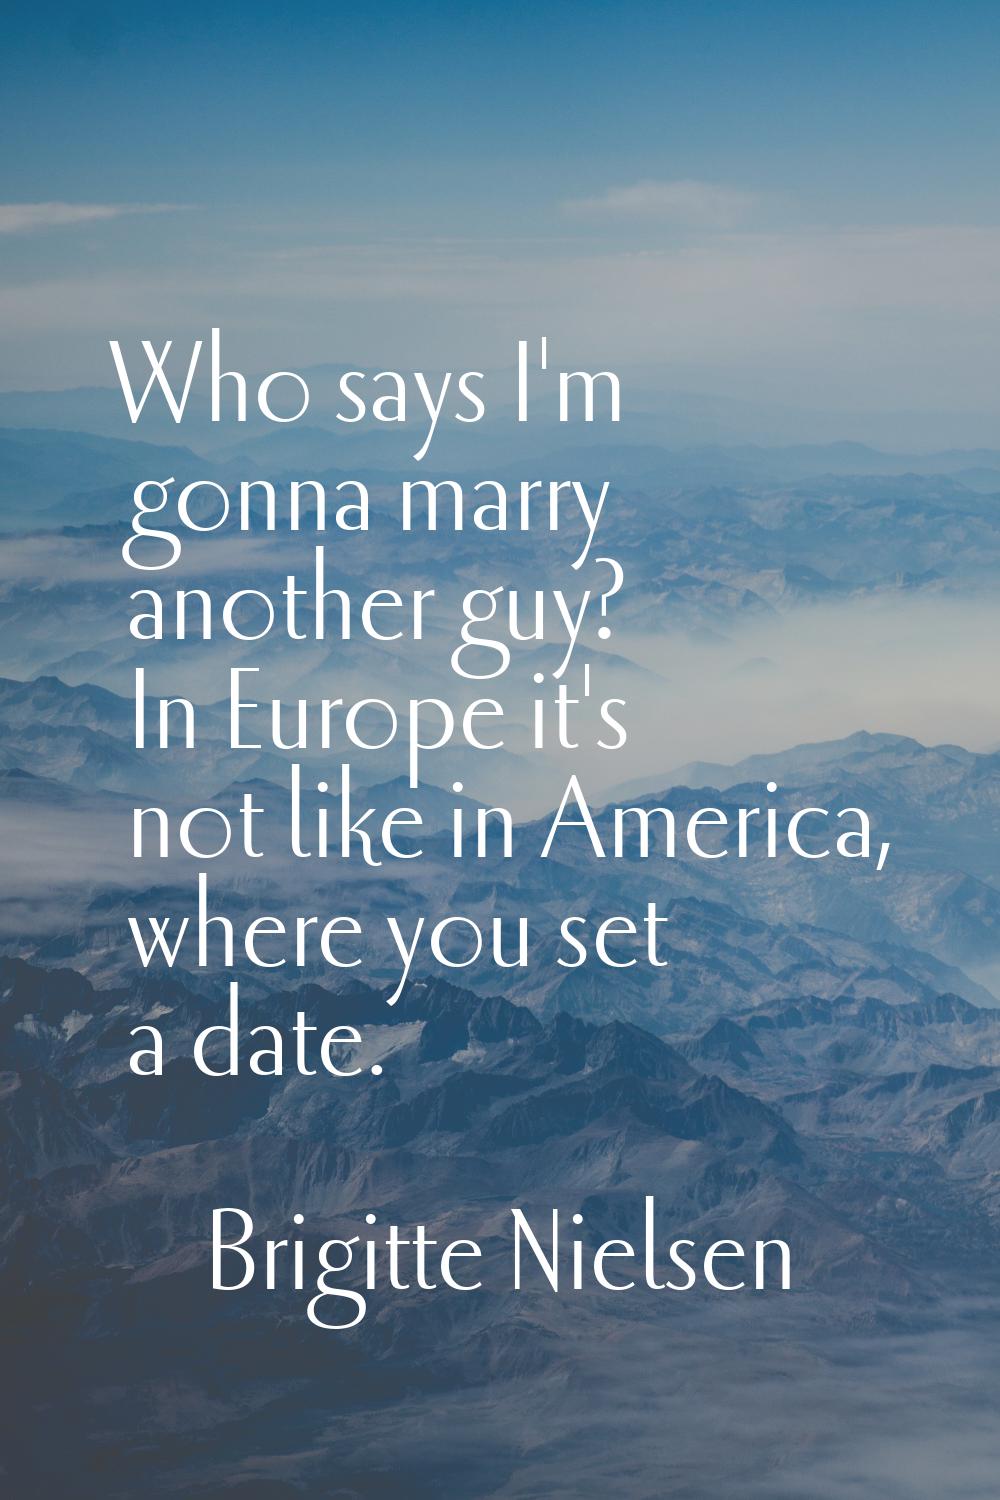 Who says I'm gonna marry another guy? In Europe it's not like in America, where you set a date.